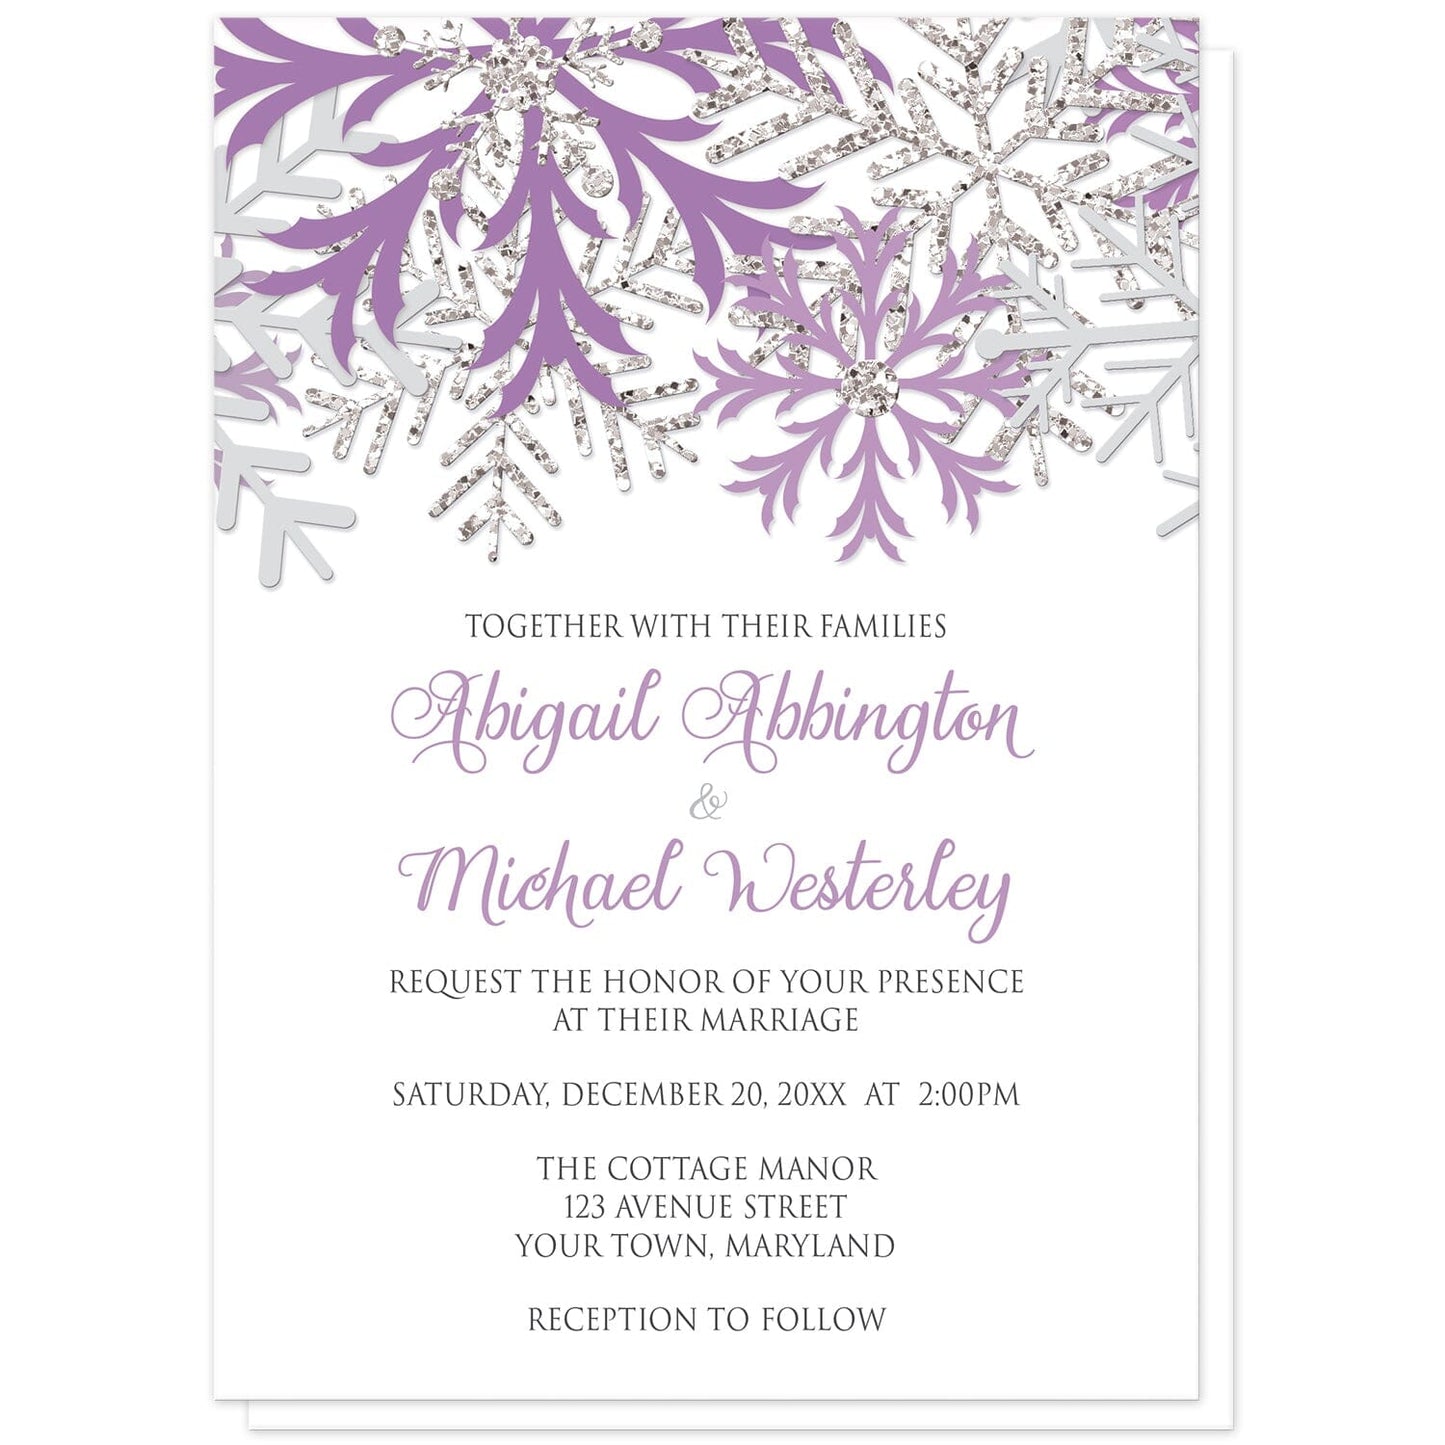 Winter Purple Silver Snowflake Wedding Invitations at Artistically Invited. Beautiful winter purple silver snowflake wedding invitations designed with purple, light purple, silver-colored glitter-illustrated, and light gray snowflakes along the top over a white background. Your personalized marriage celebration details are custom printed in purple and gray below the pretty snowflakes.